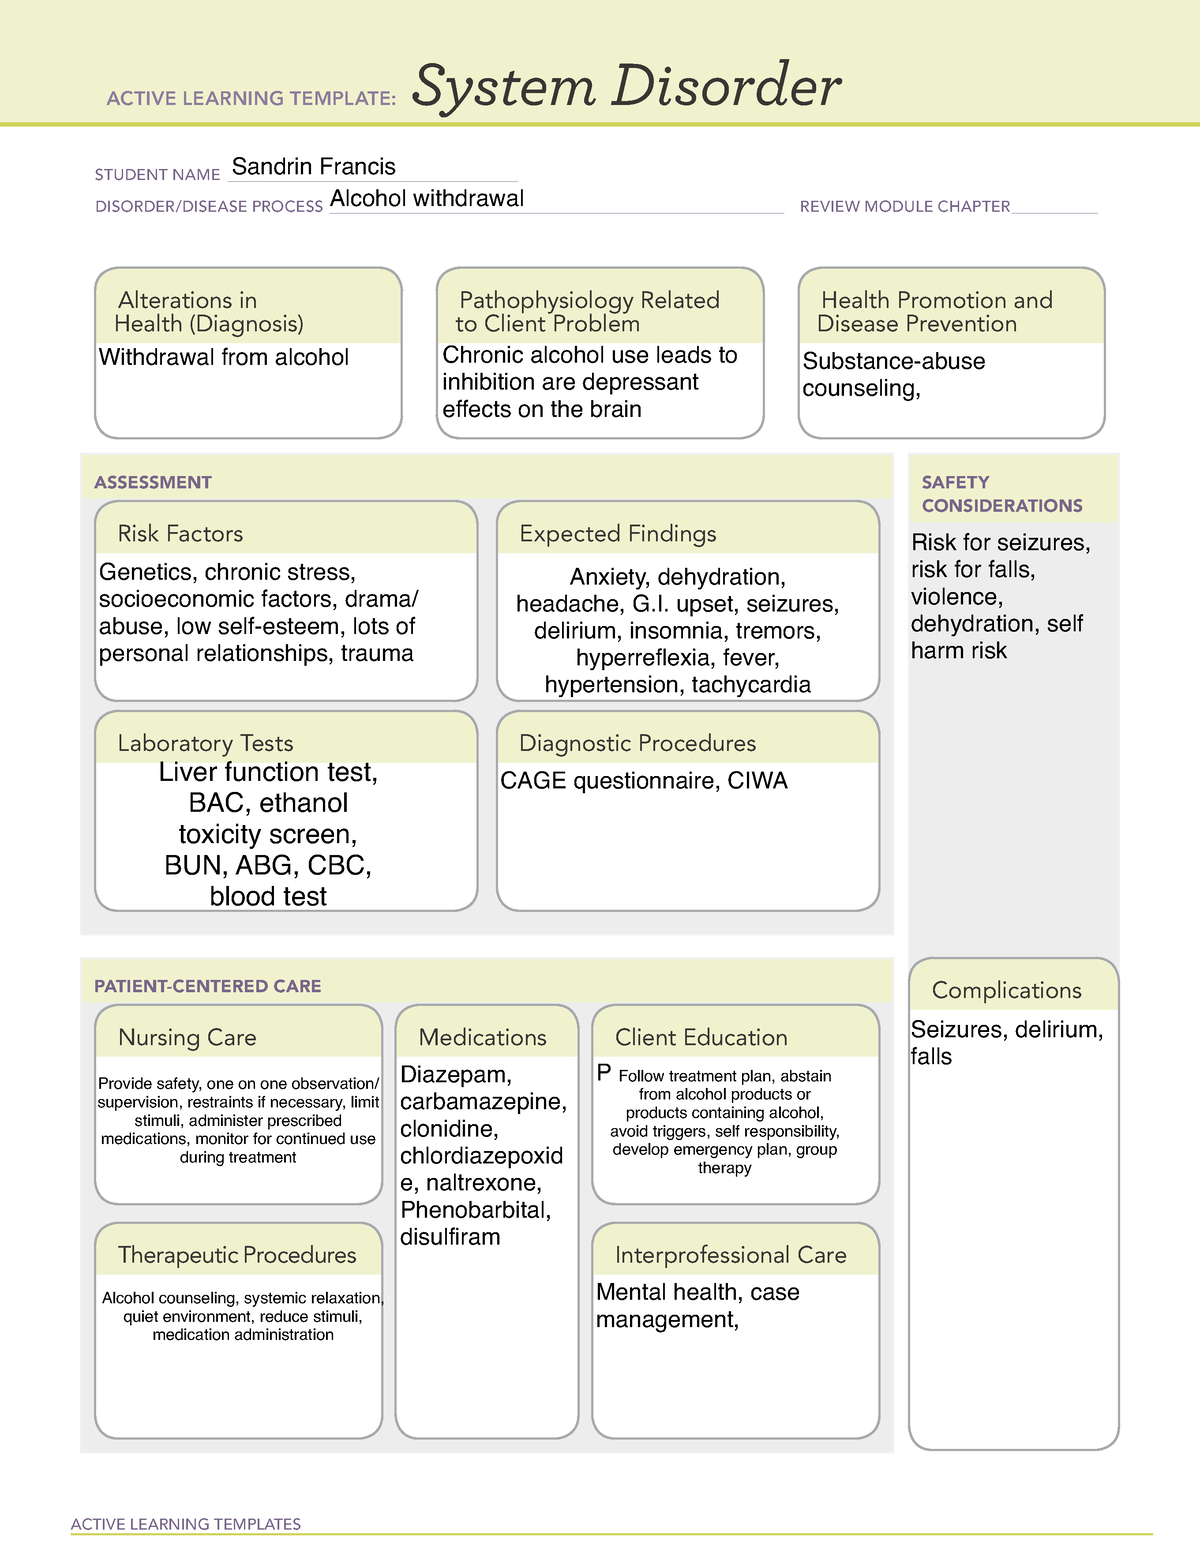 ati-system-disorder-active-learning-template-active-learning-templates-system-disorder-student